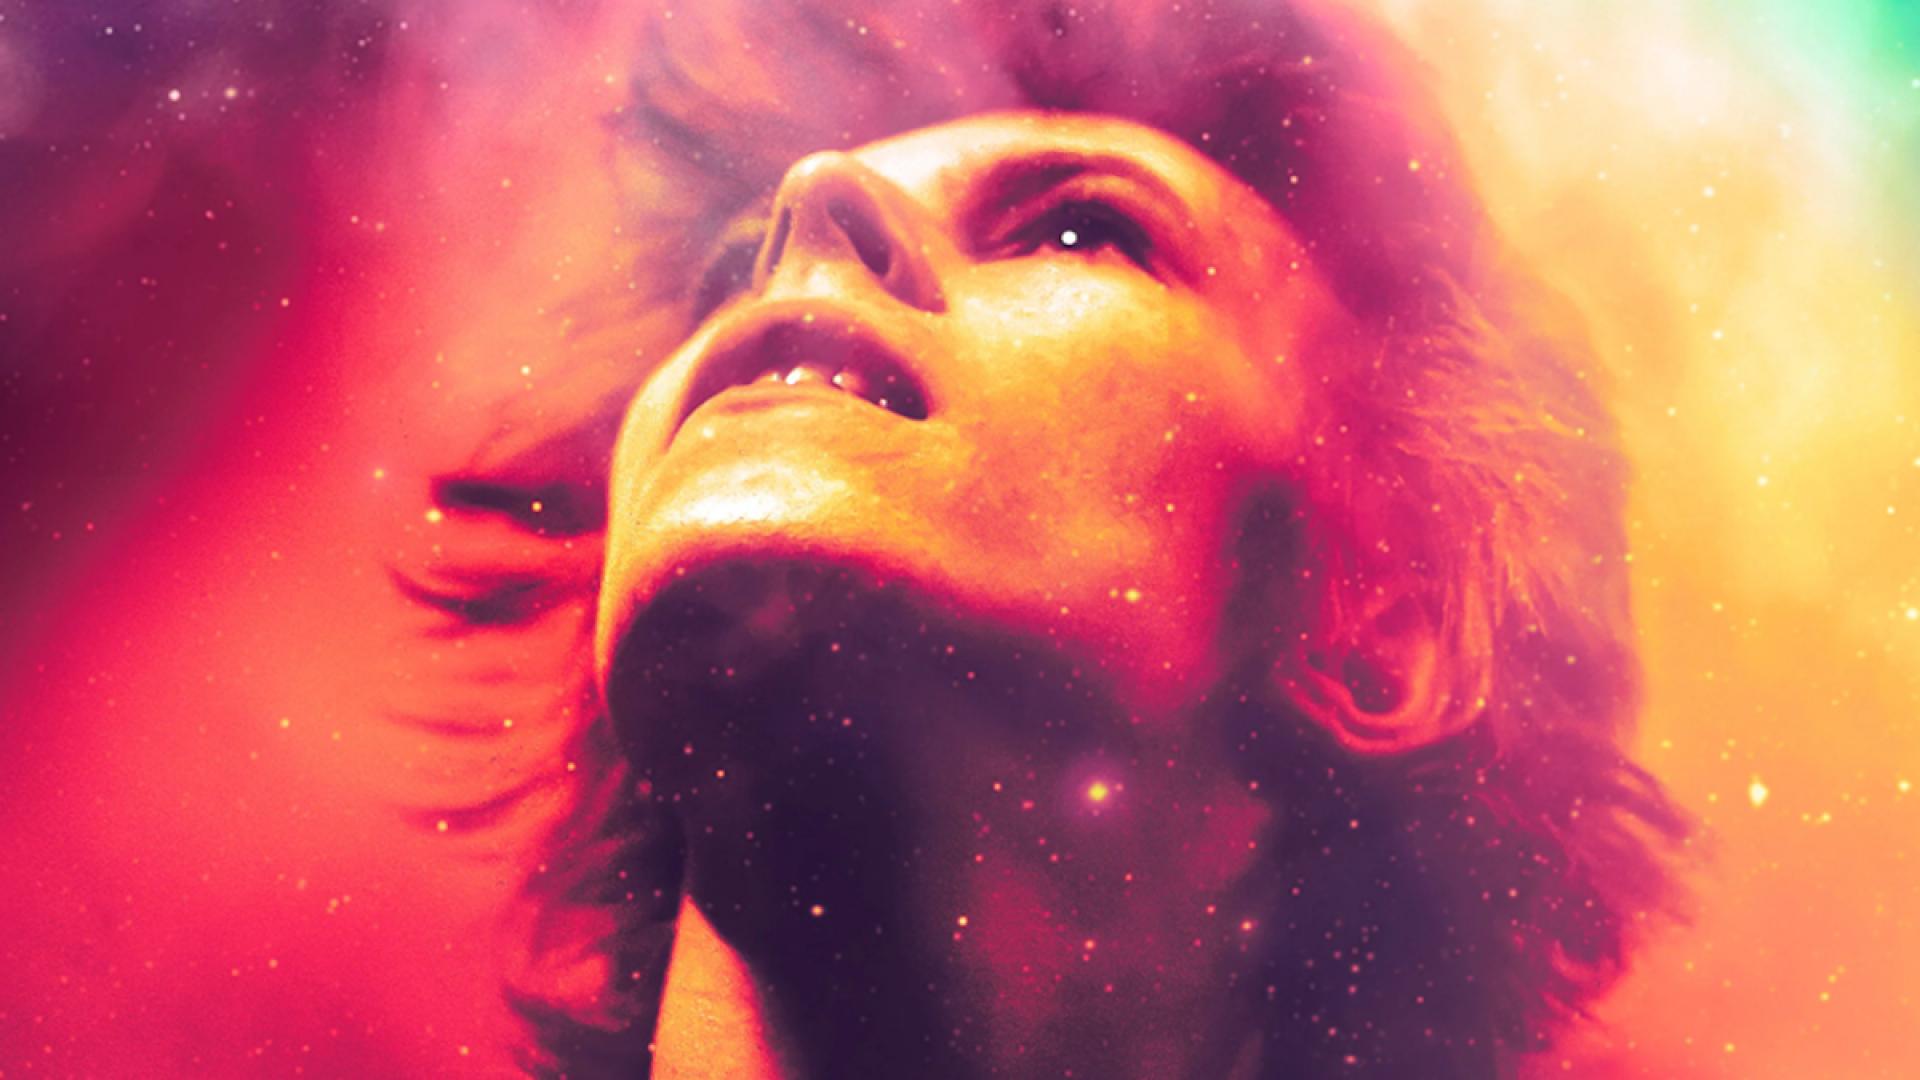 David Bowie Documentary 'Moonage Daydream' Sets September Release Date